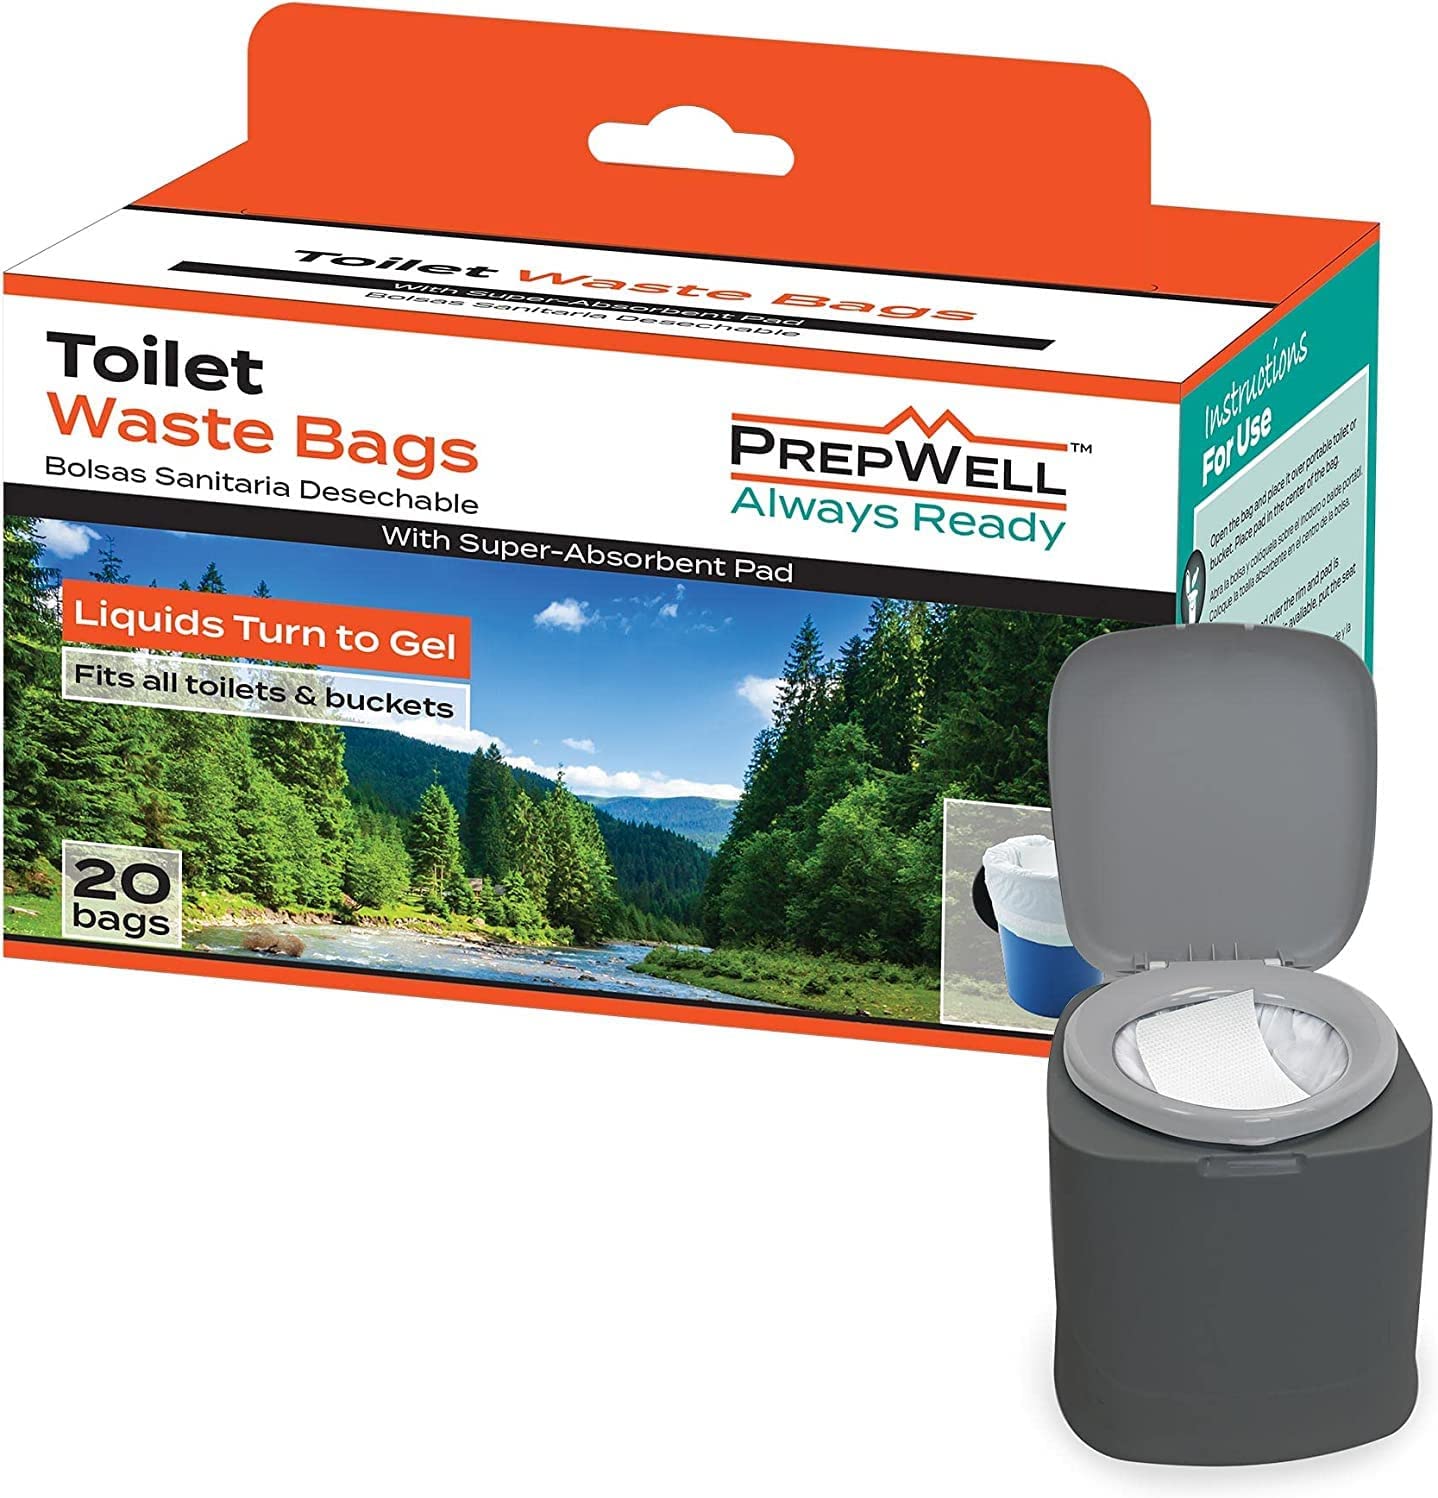 PrepWell Toilet Waste Bags - Box of 20 Bags